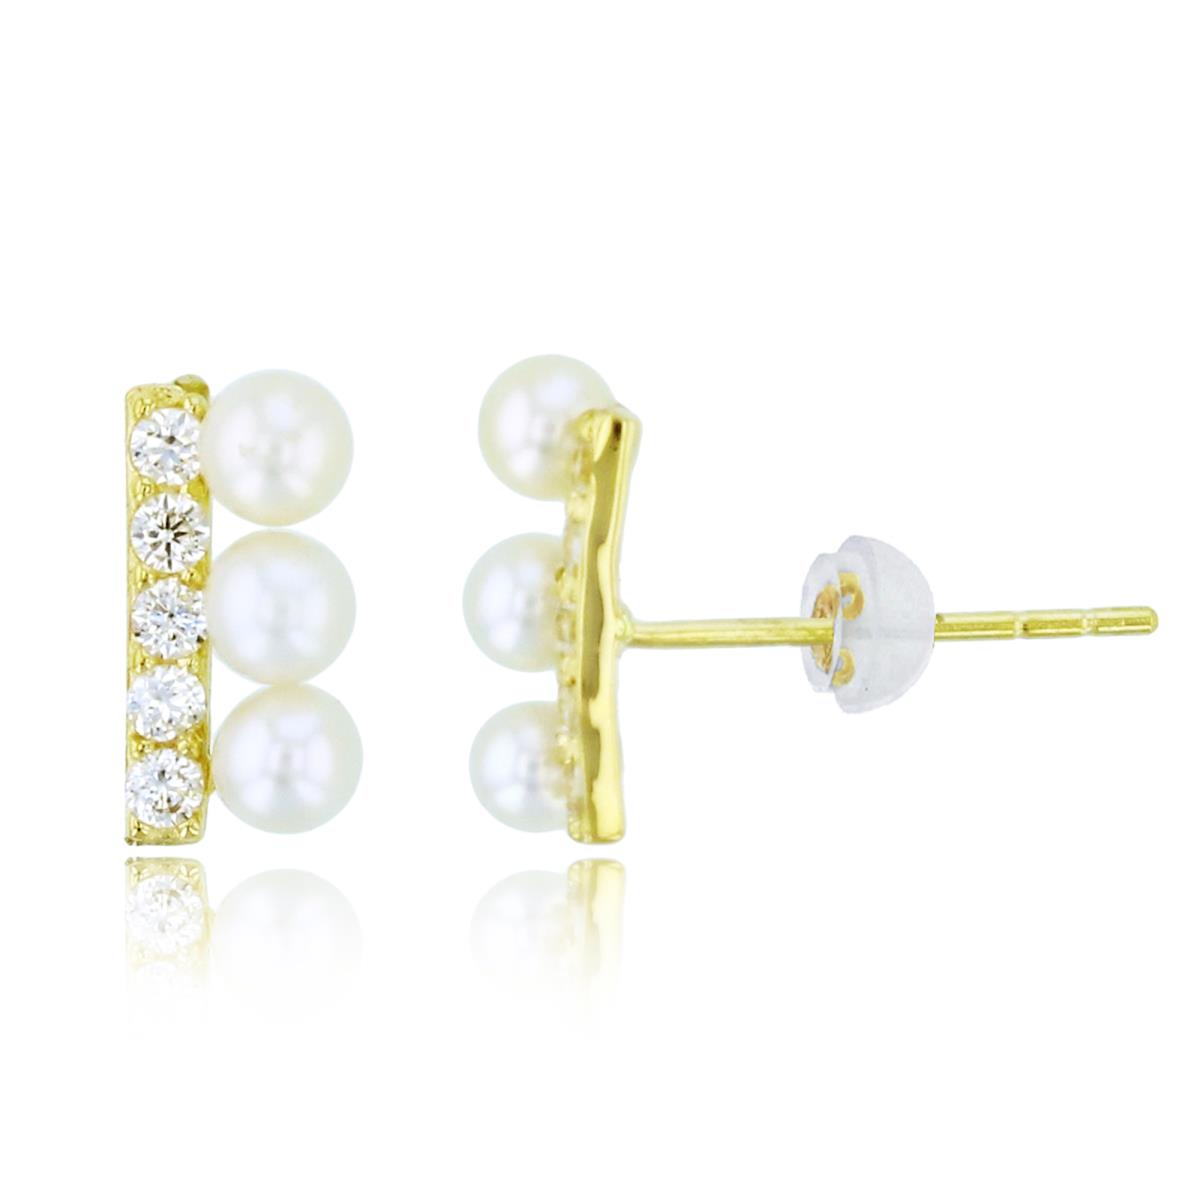 10K Yellow Gold 3.5mm Rnd Pearls & Rnd White CZ Row Studs with Silicon Backs